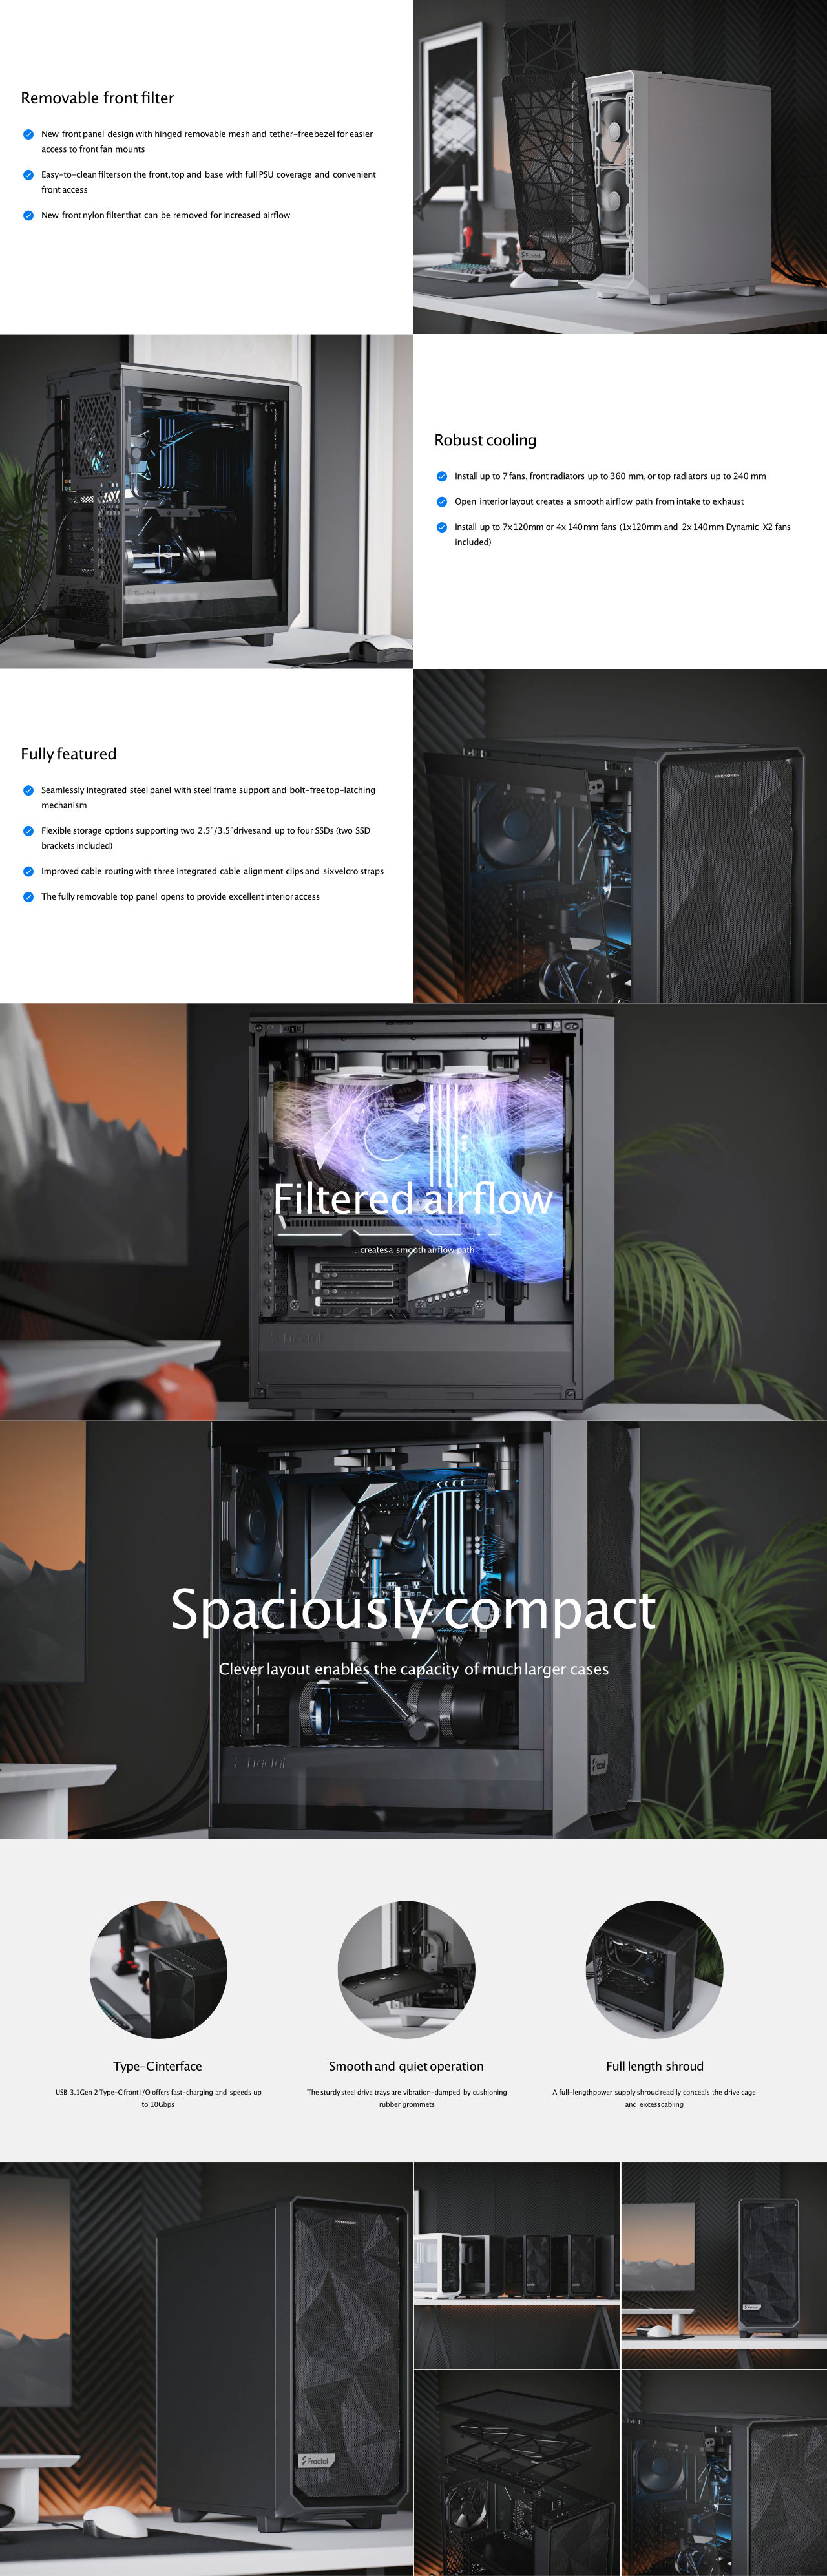 Fractal Design Meshify 2 Compact ATX Mid Tower Computer Case Overview Image